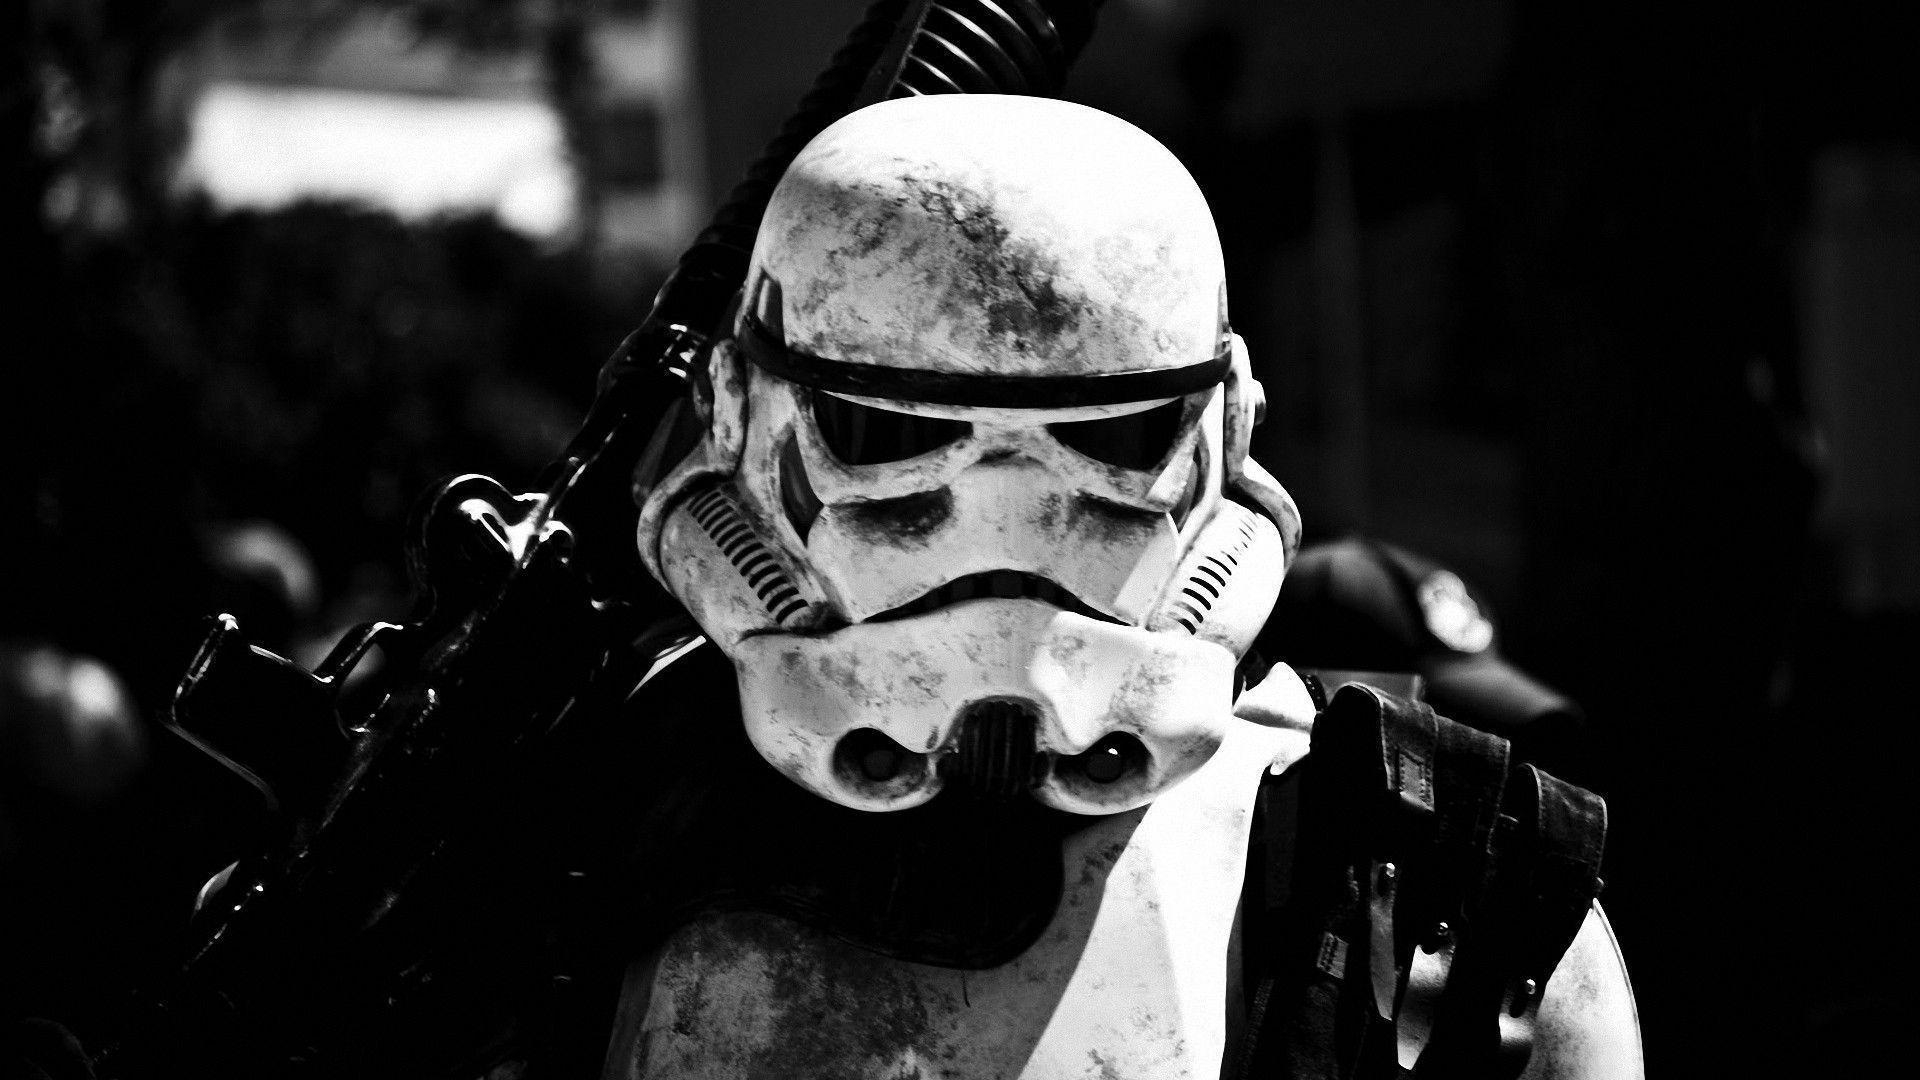 1920x1080 Imperial Stormtrooper Wallpapers Top Free Imperial Stormtrooper Backgrounds